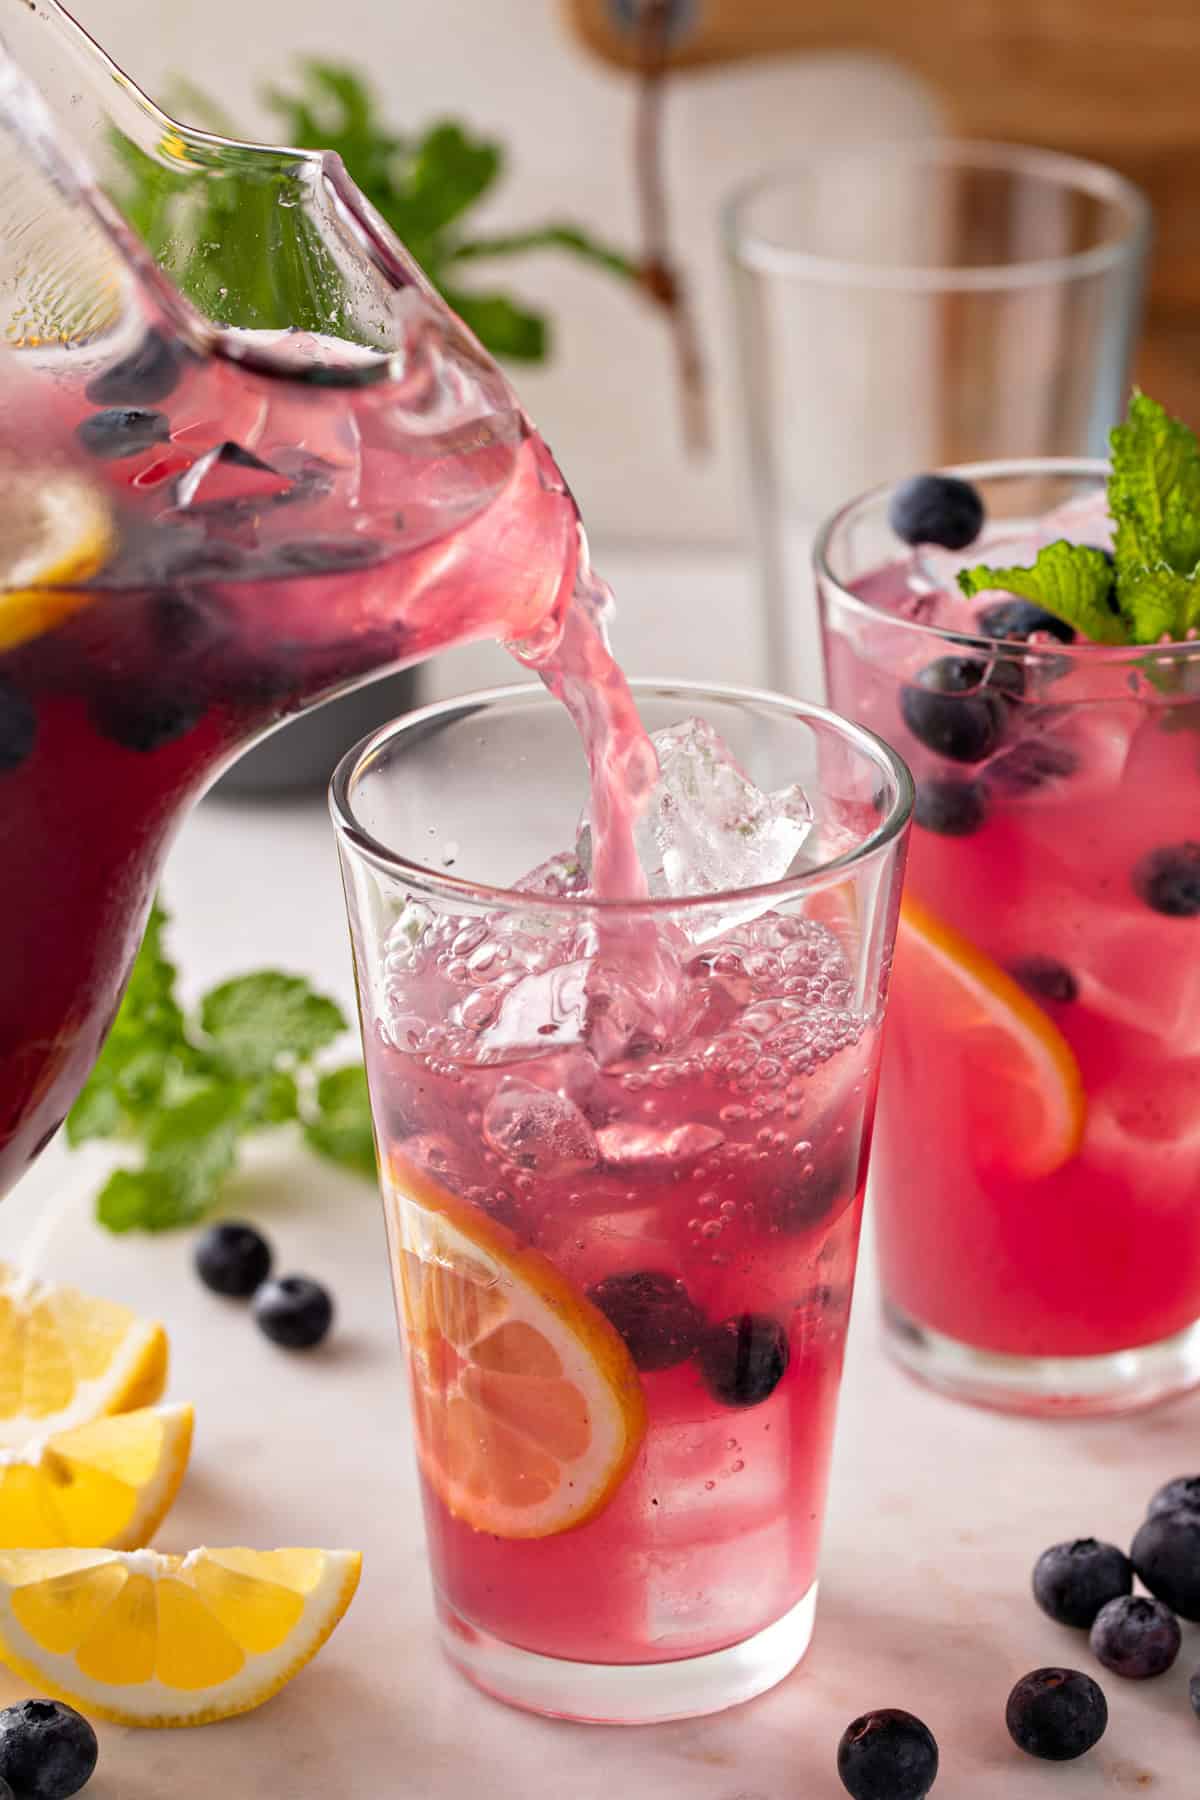 Blueberry lemonade being poured into a glass.